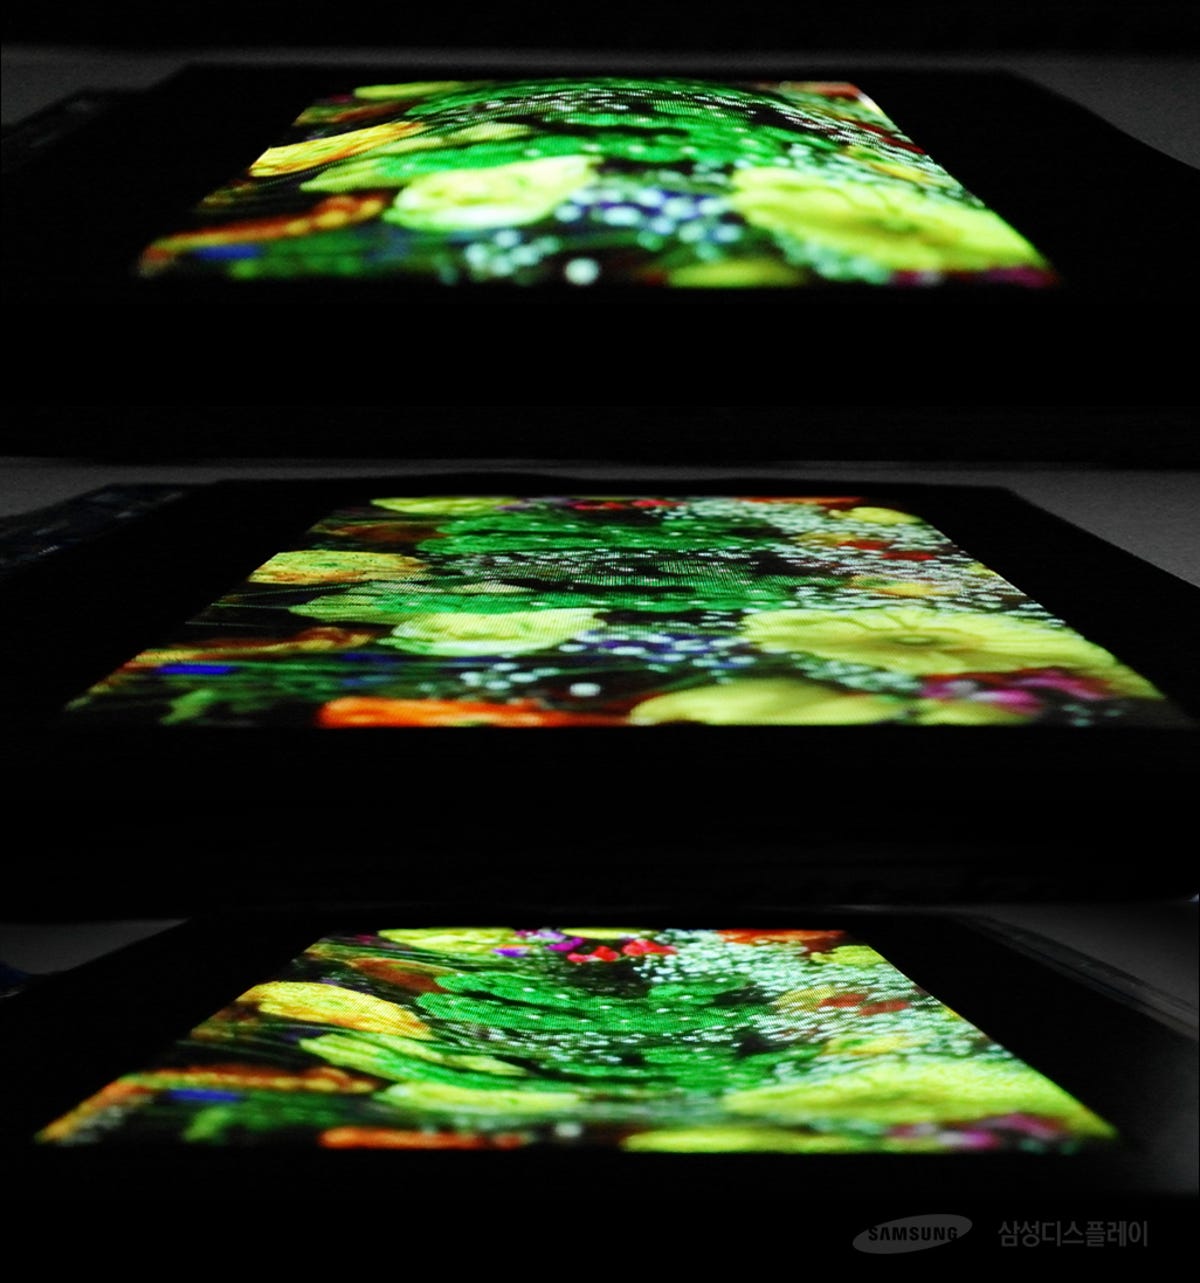 Samsung's stretchable display can be flexed in two directions, unlike conventional flexible displays, which can be formed in only one direction (such as bending, folding or rolling).